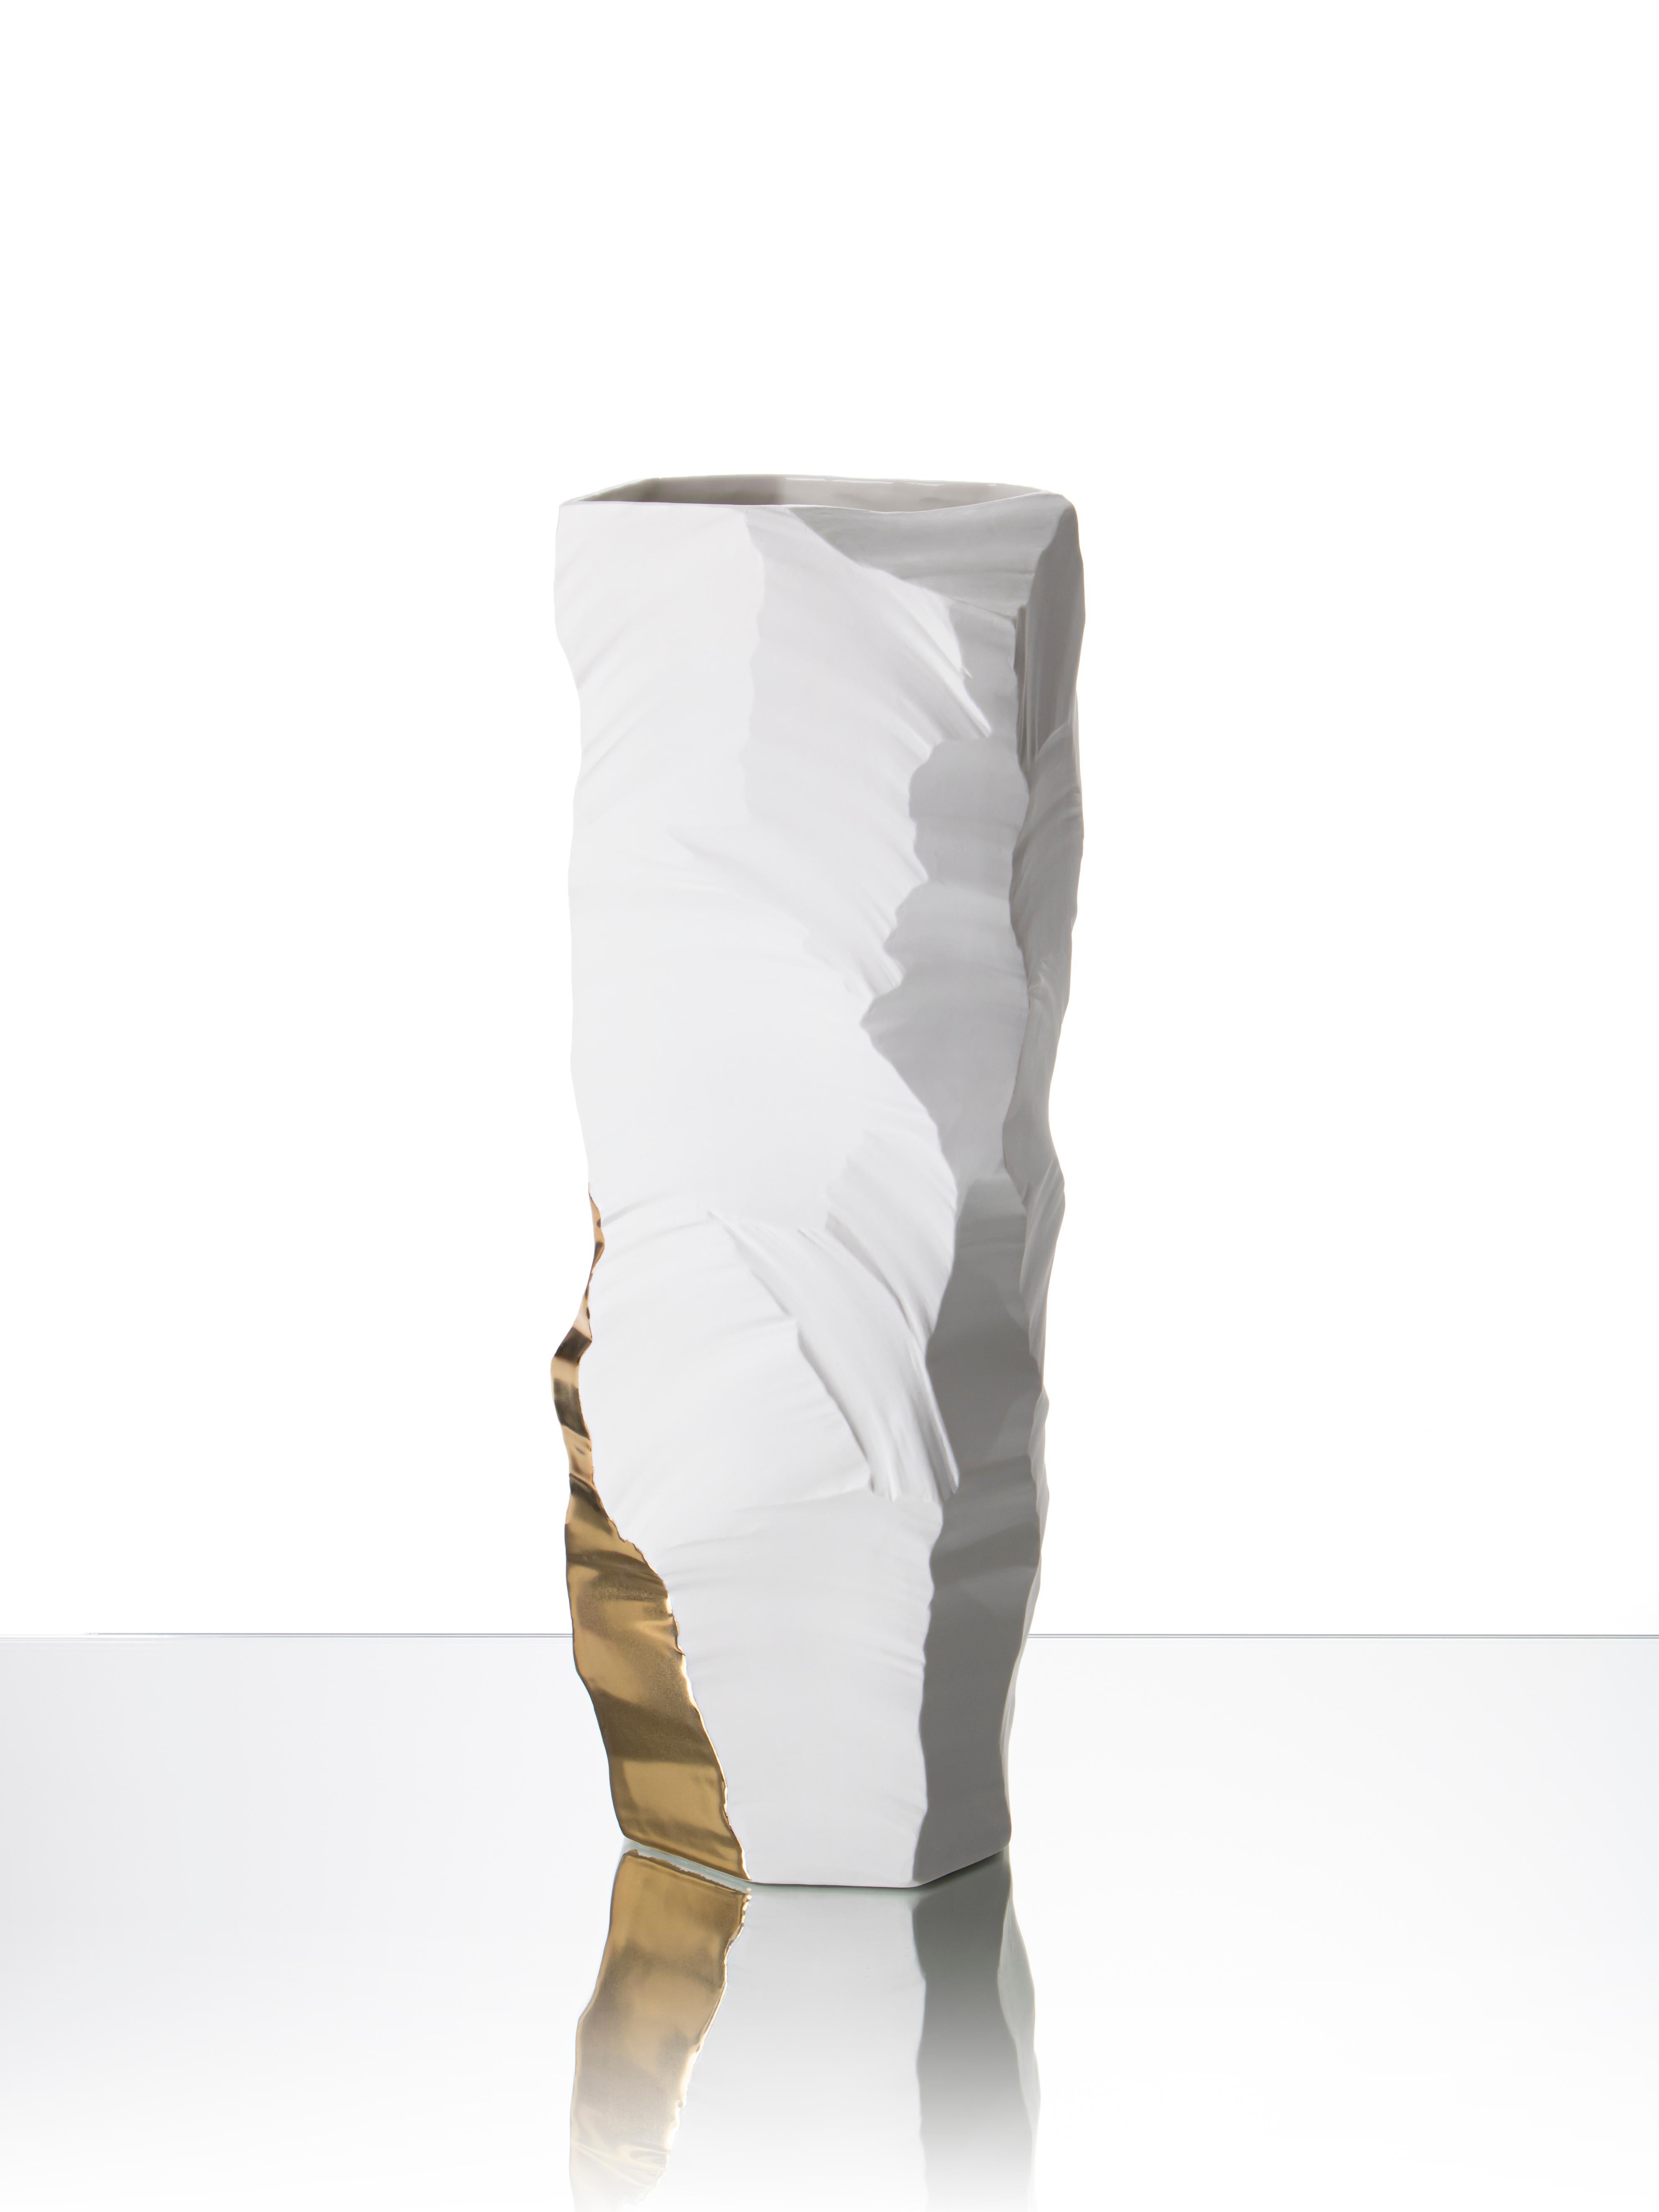 Modern Contemporary Porcelain Big Vase Gold Iceberg Ceramic Hand-Painted Italy Fos For Sale